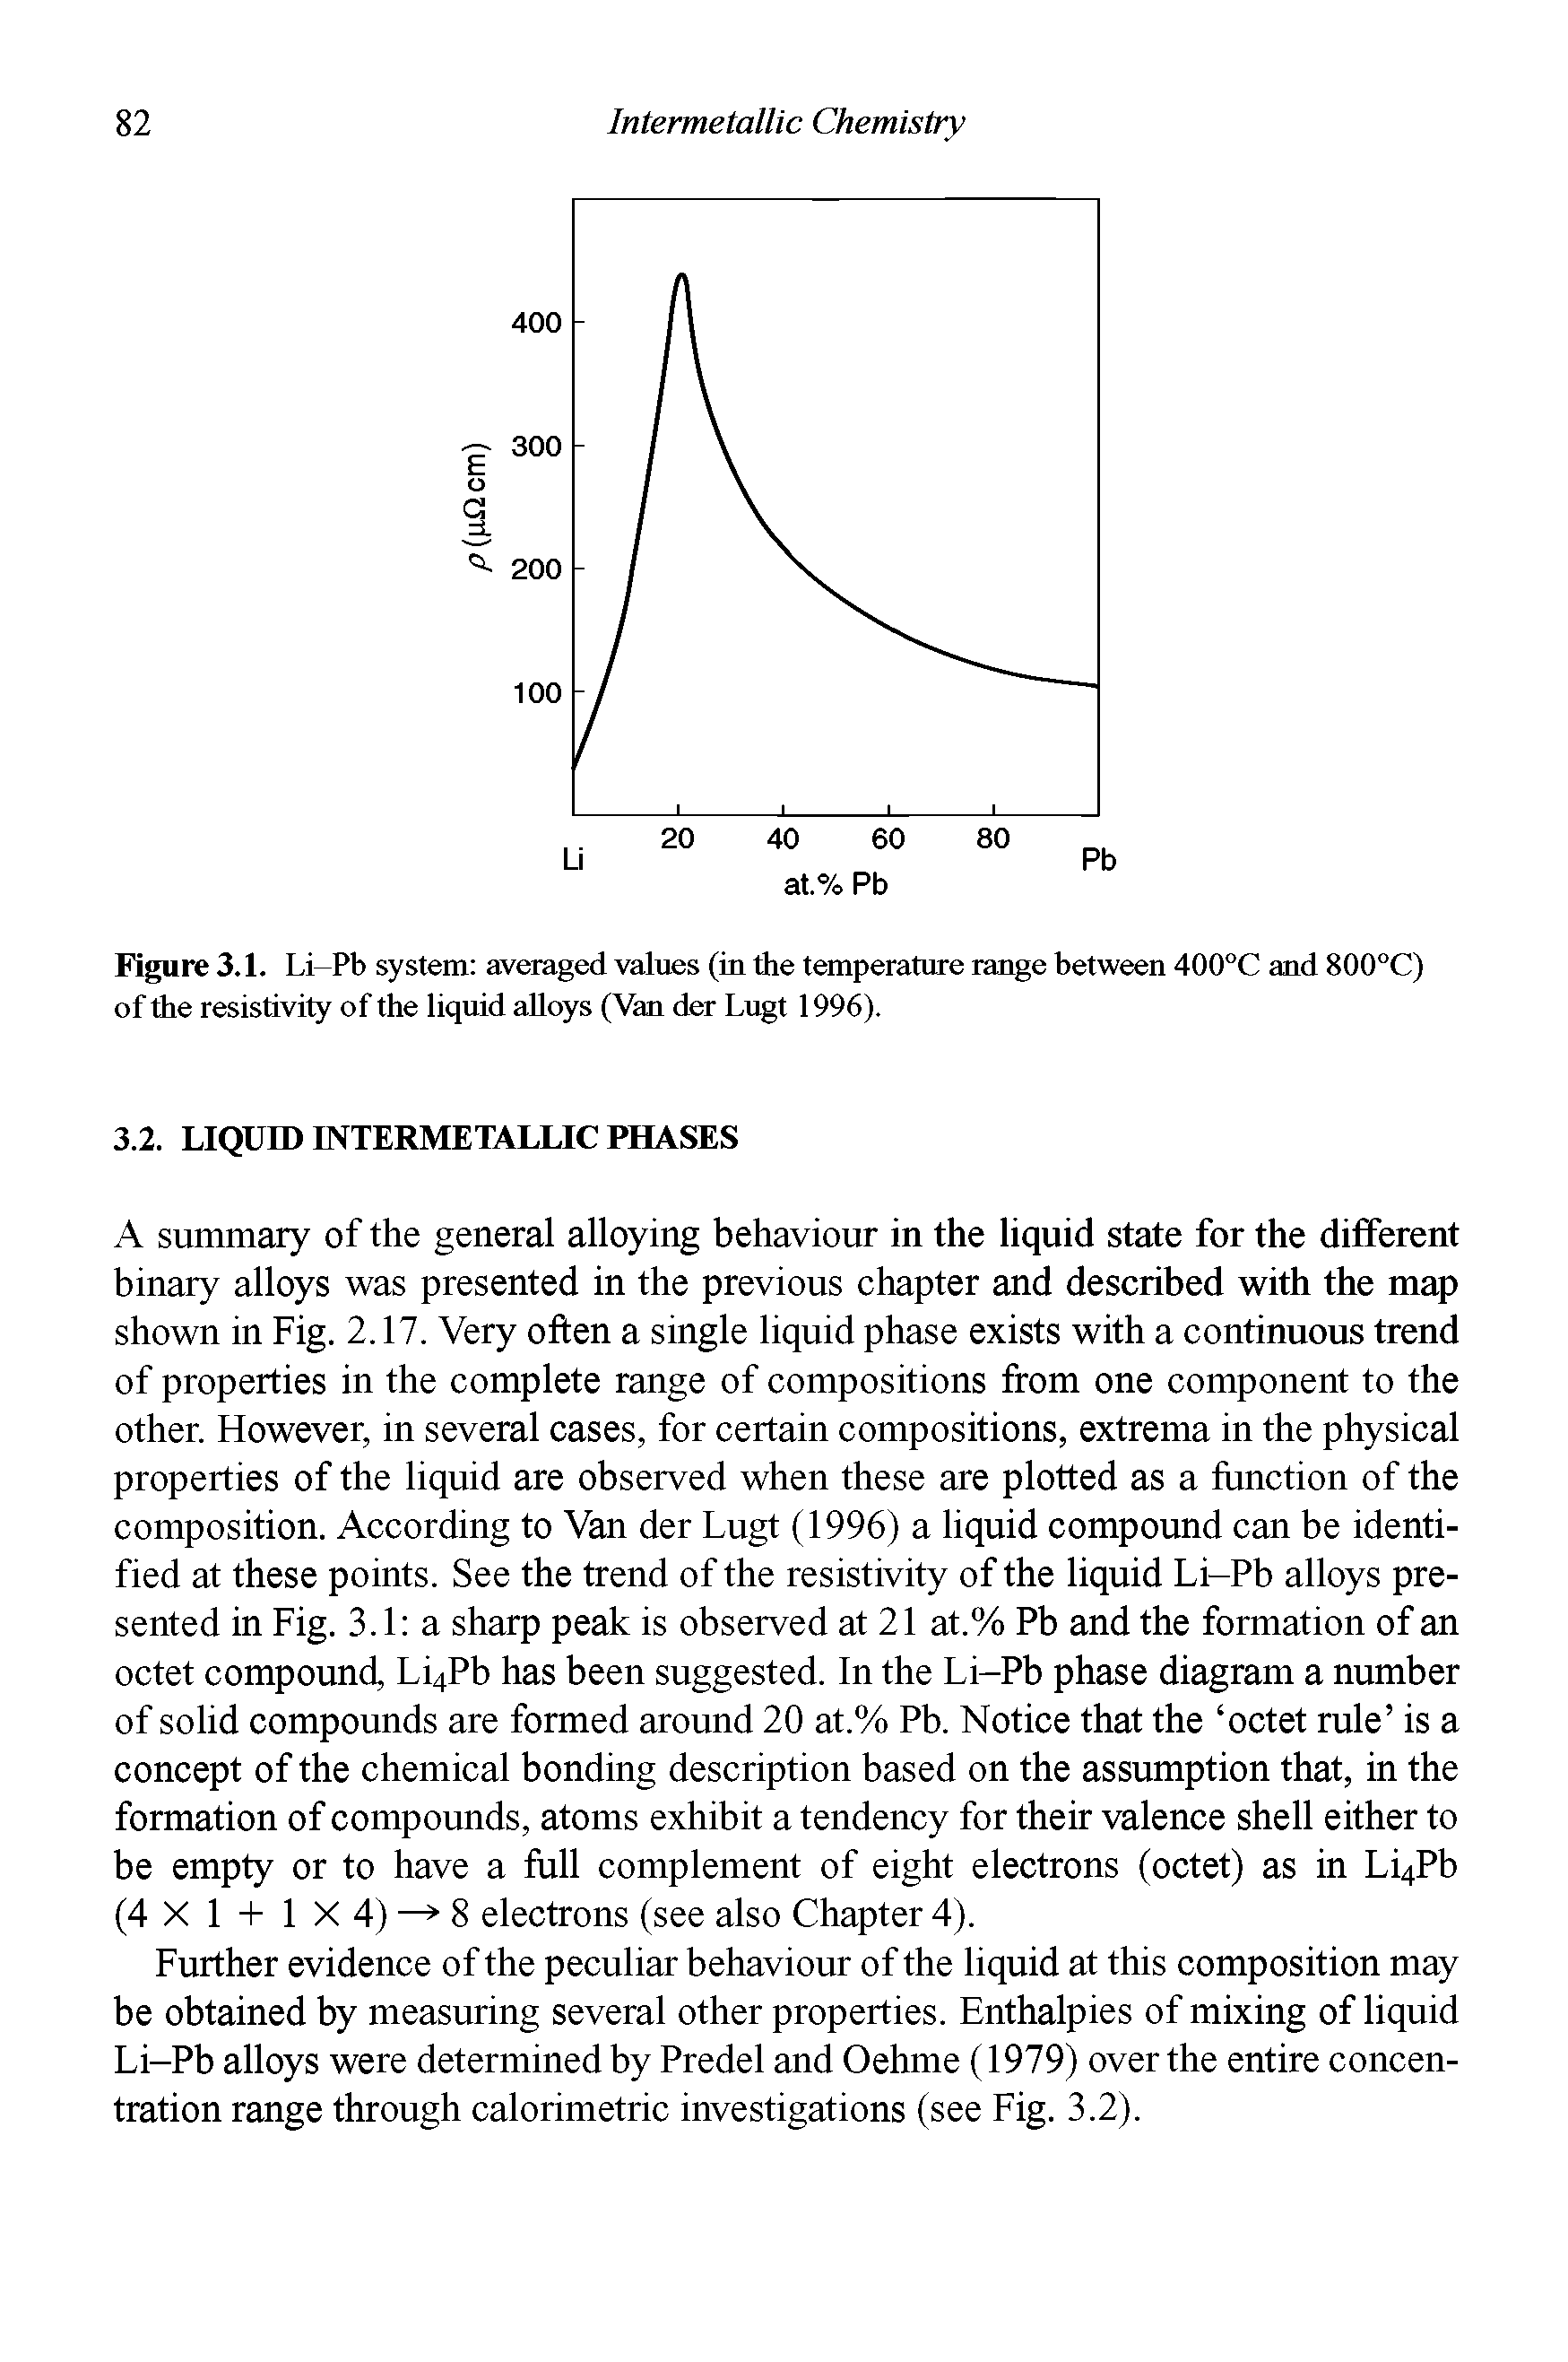 Figure 3.1. Li-Pb system averaged values (in the temperature range between 400°C and 800°C) of the resistivity of the liquid alloys (Van der Lugt 1996).